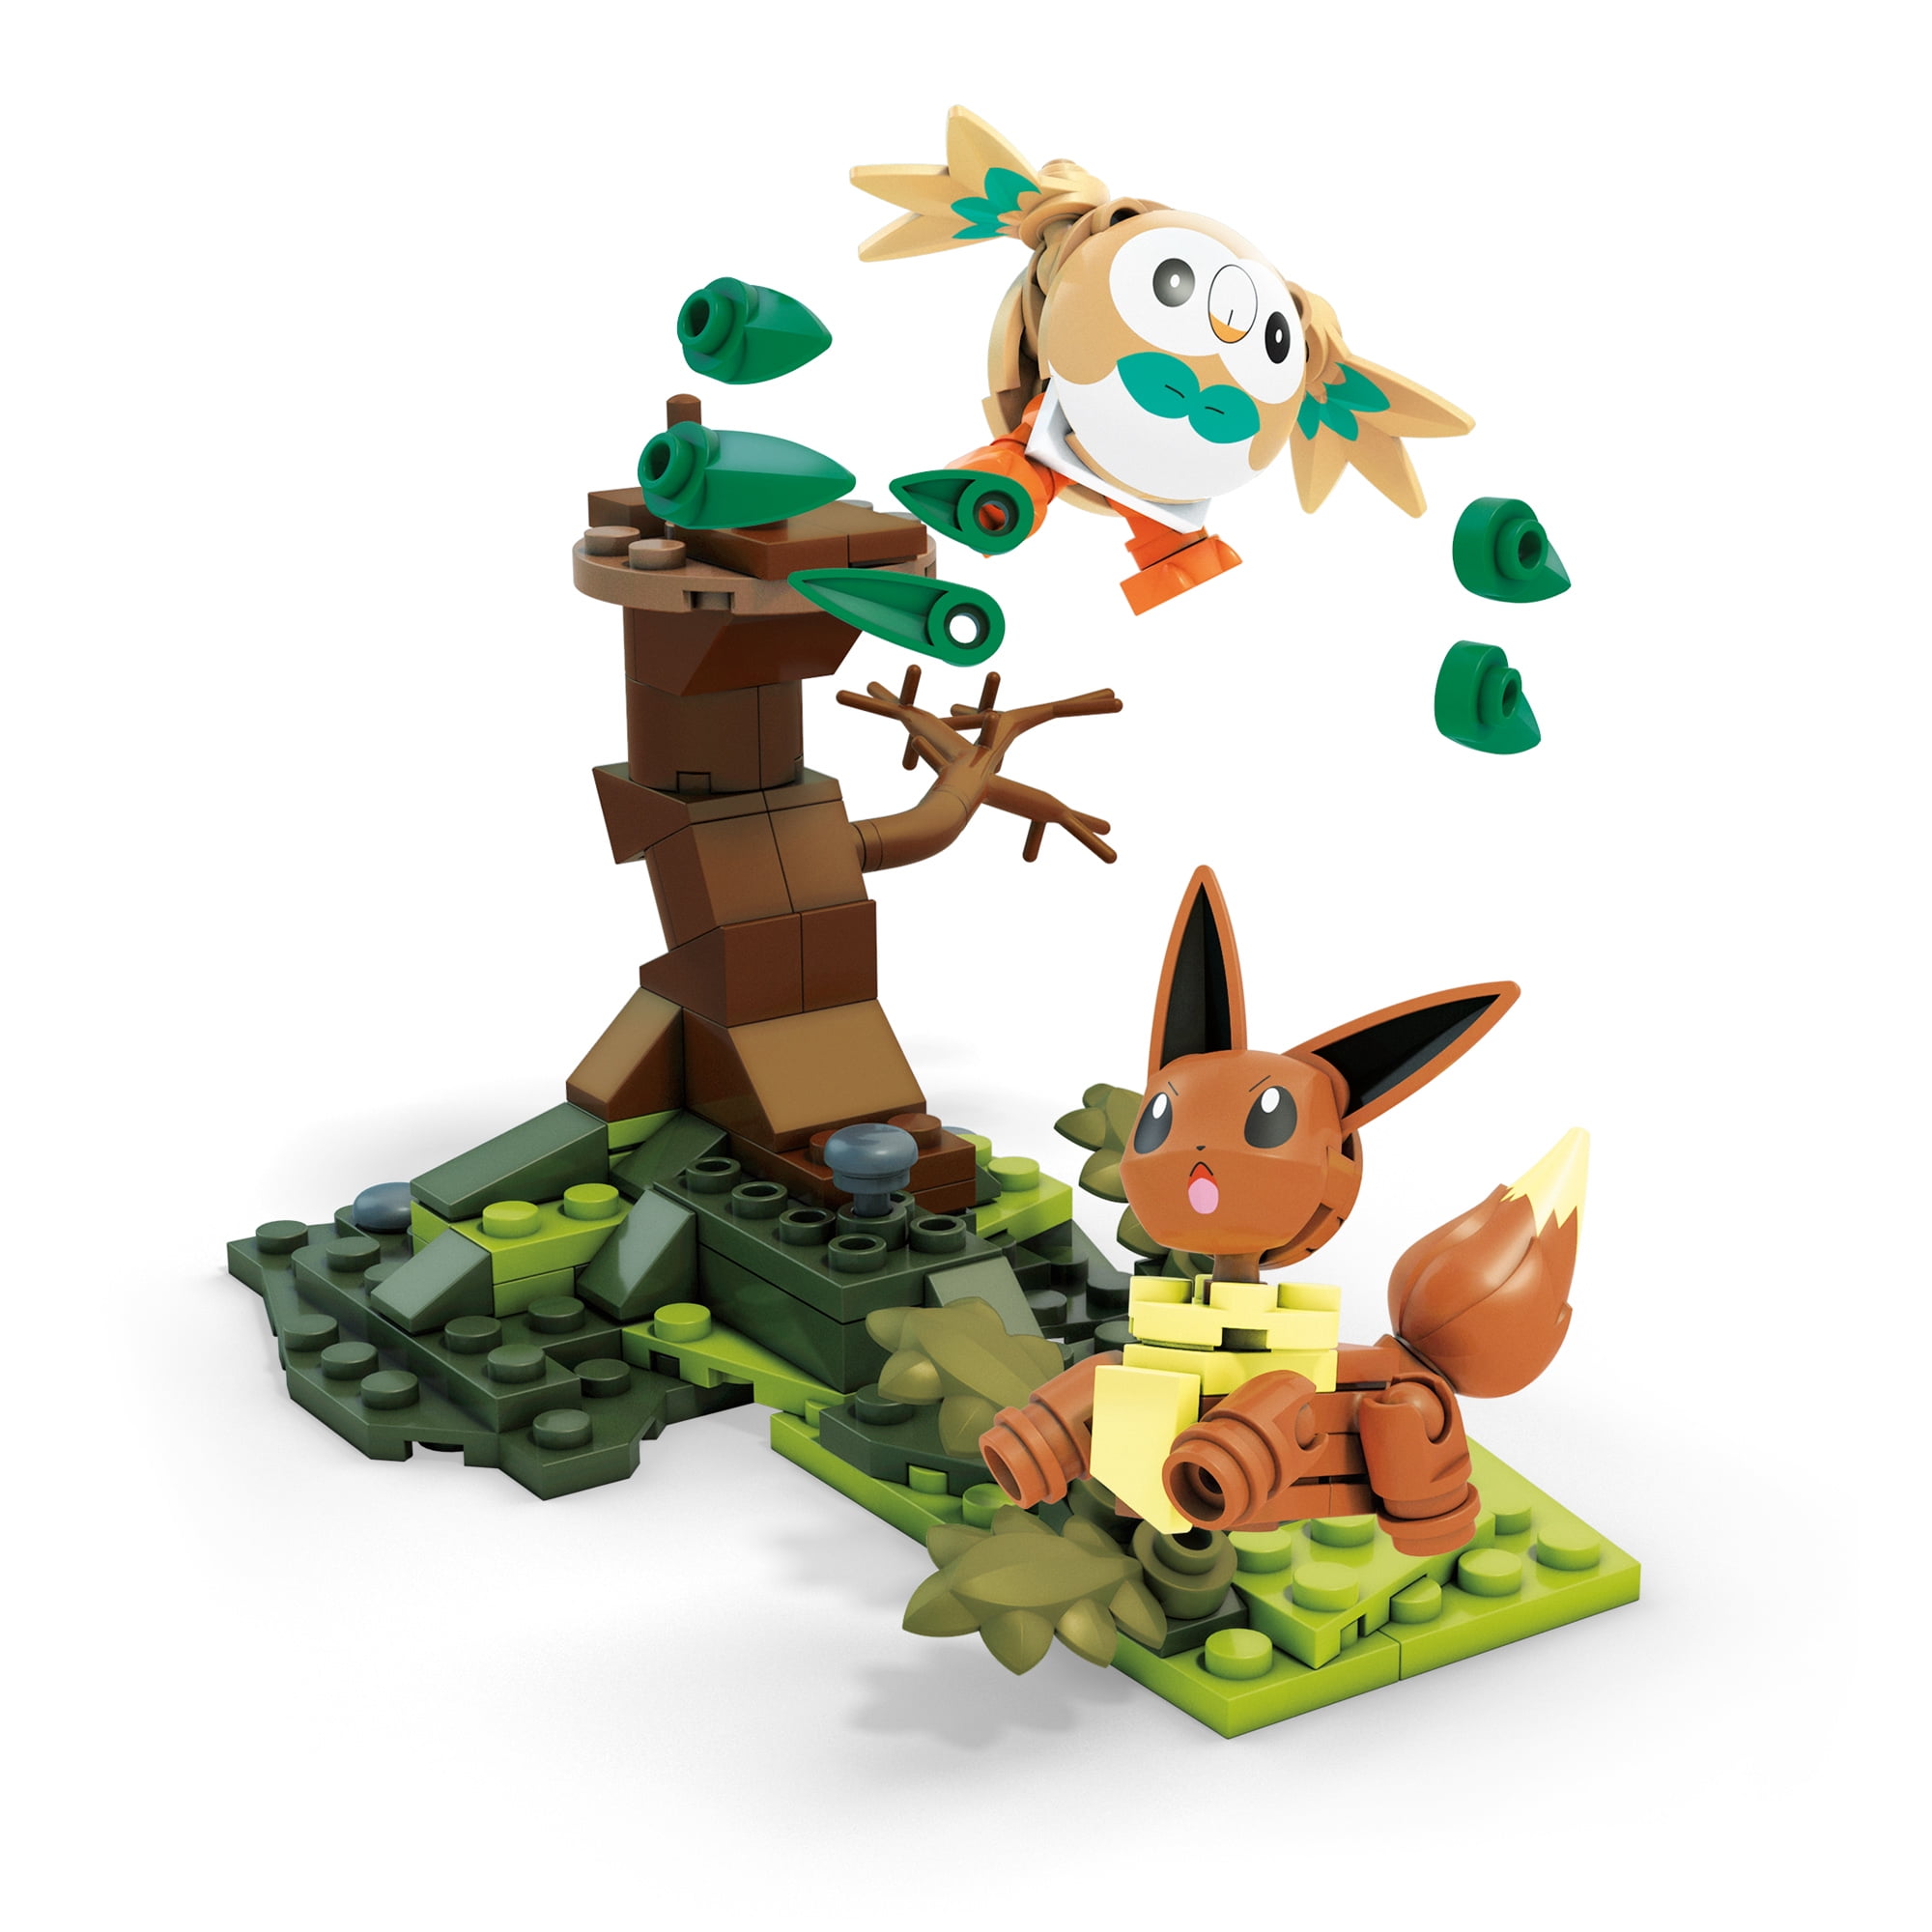 Mega Construx Pokemon Ditto Construction Set with character